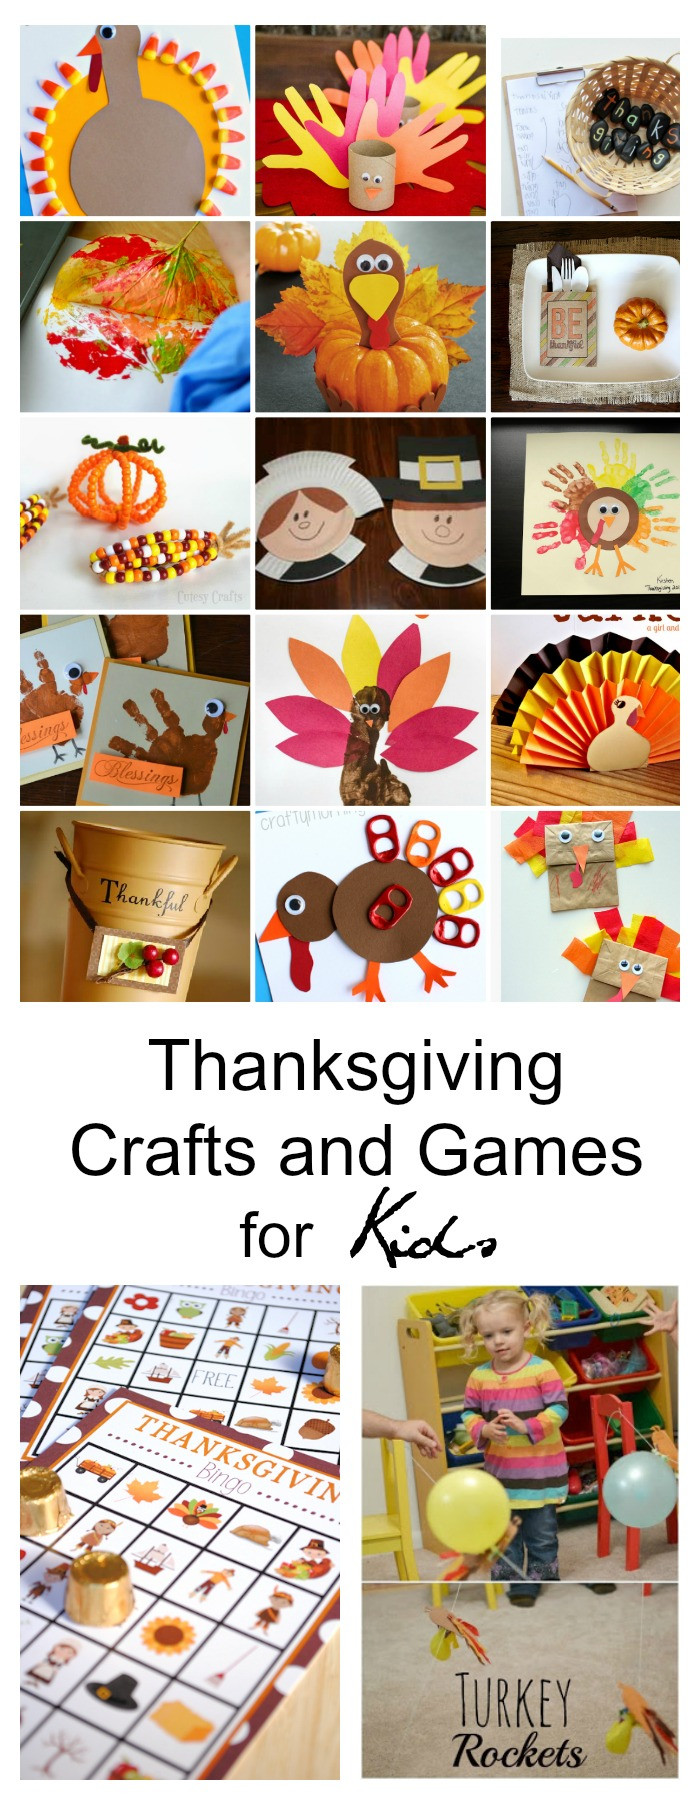 Thanksgiving Turkey Games
 Thanksgiving Crafts and Games for Kids The Idea Room